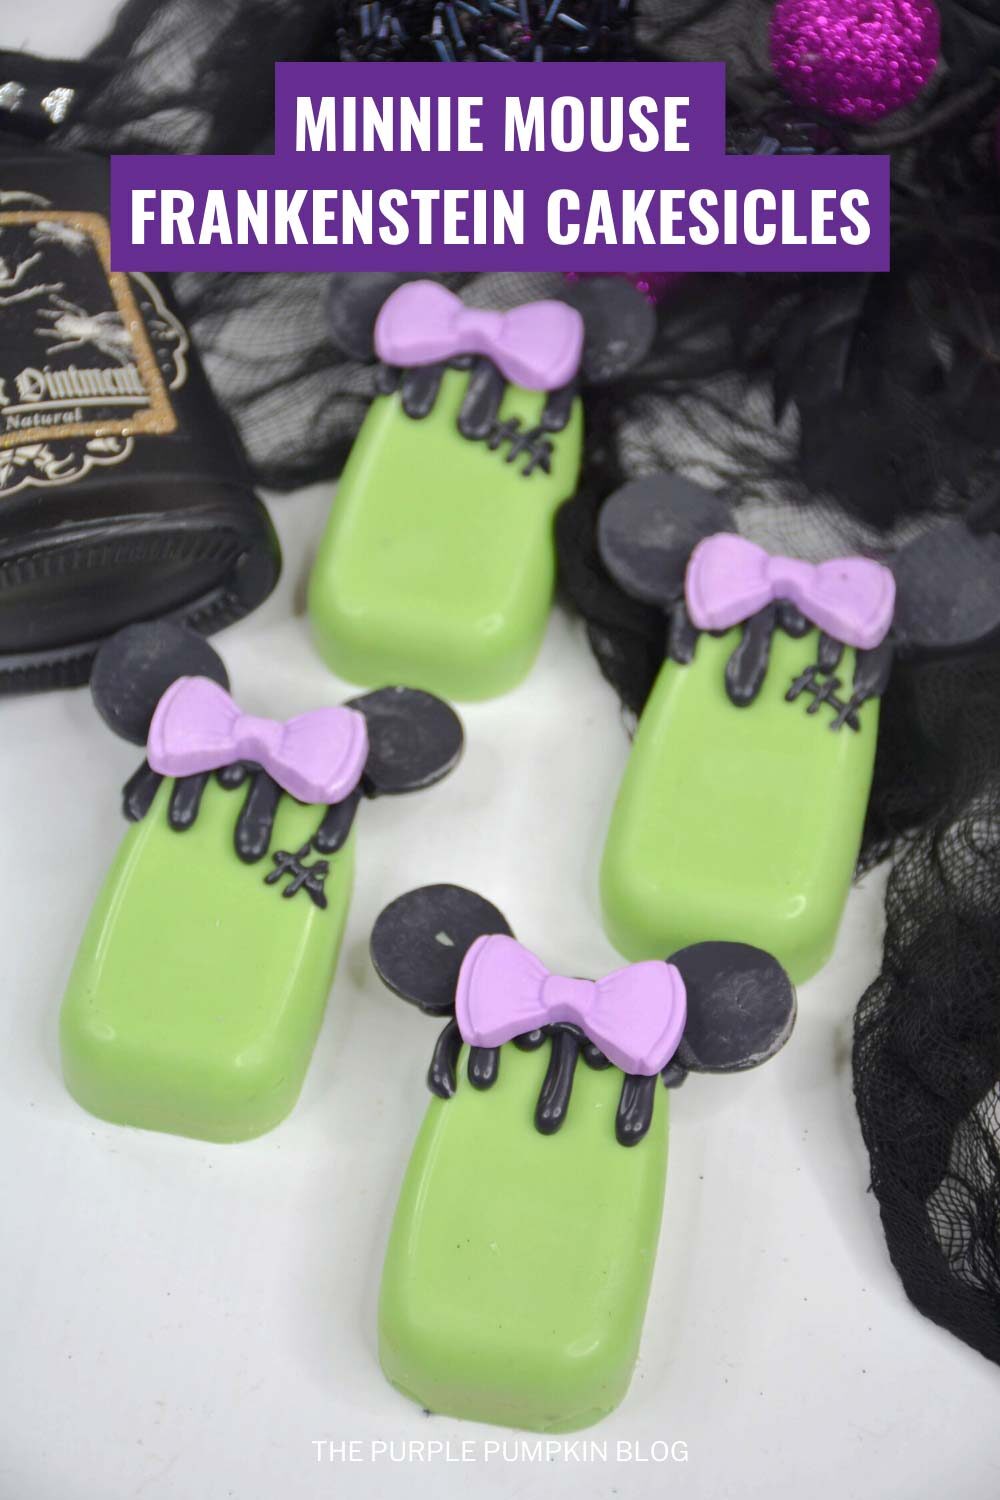 Minnie Mouse Frankenstein Cakesicles